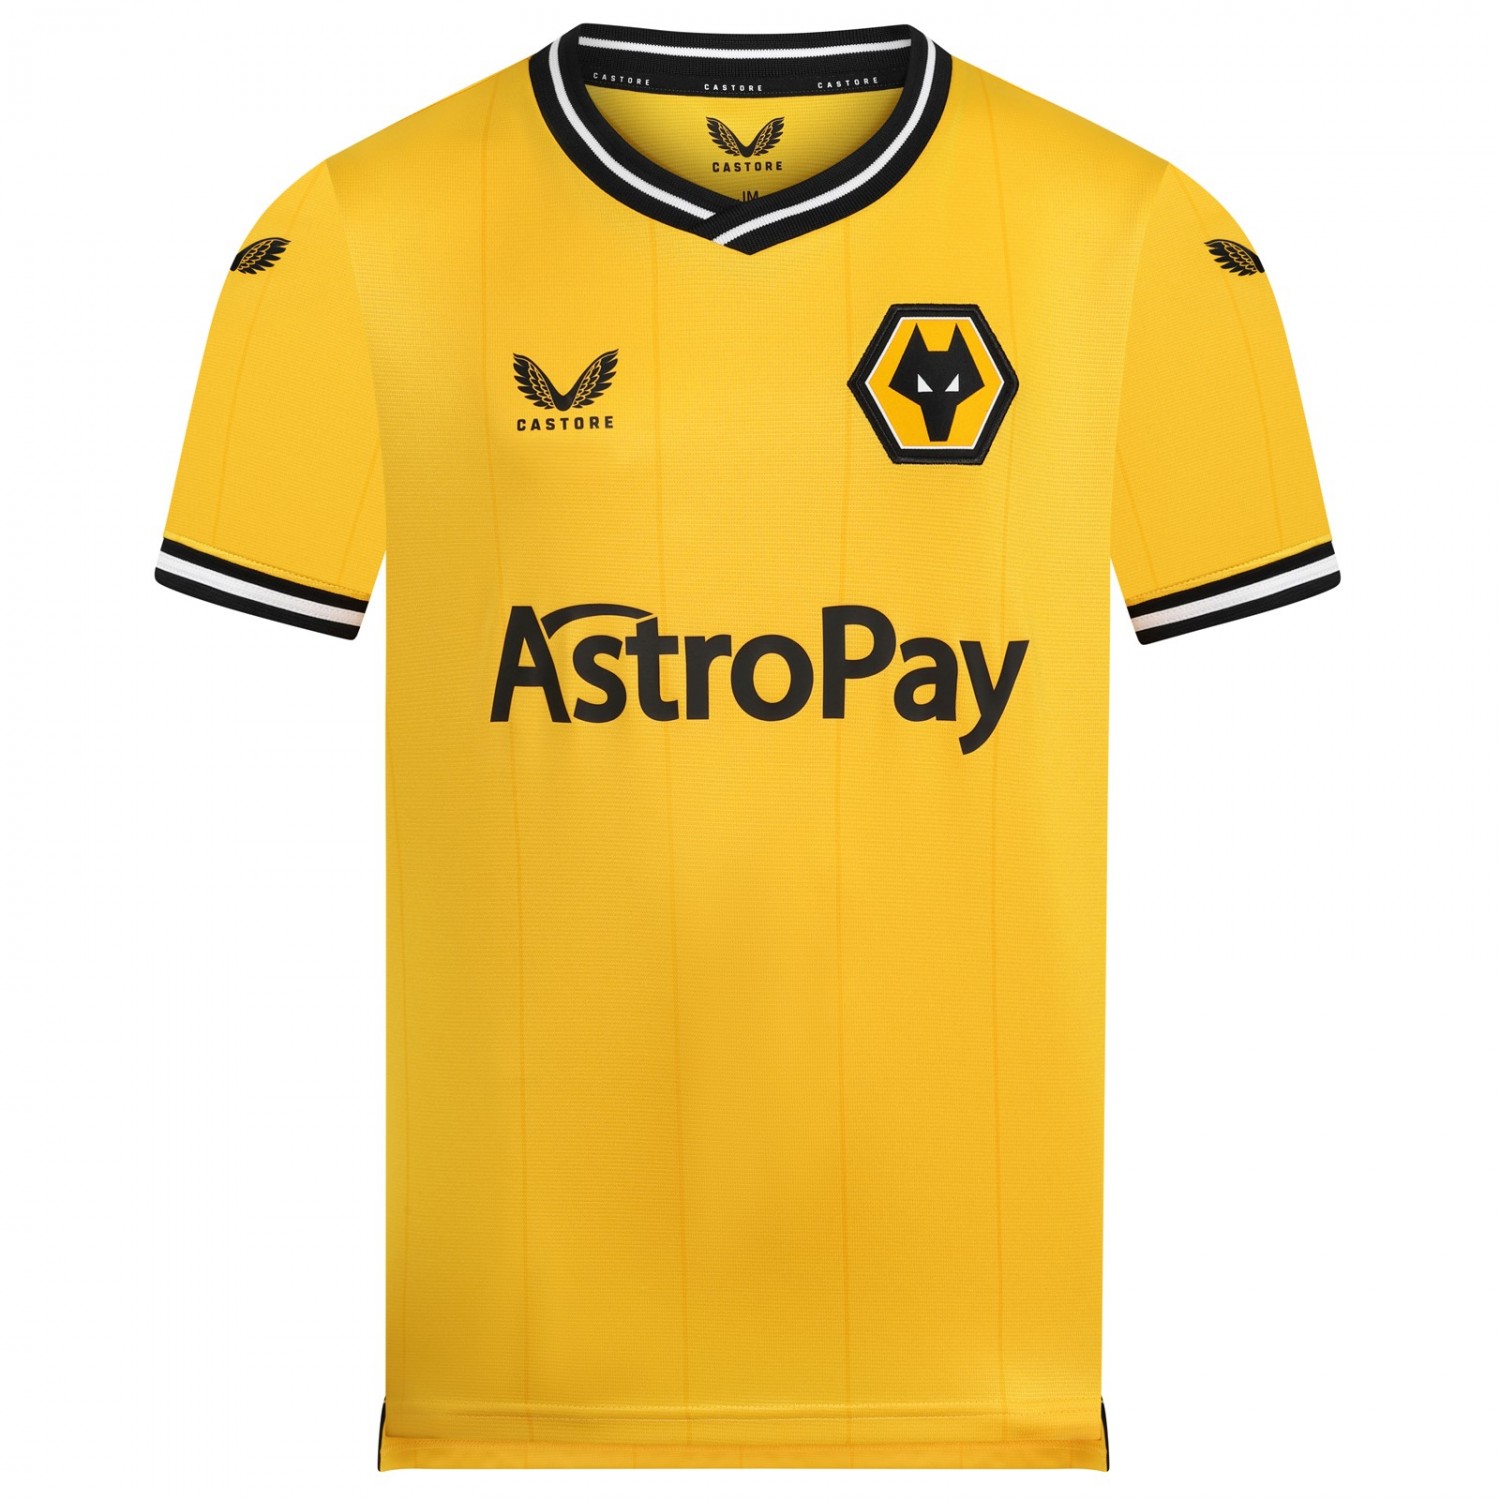 2023-24 wolves home shirt - junior
introducing the 2023-24 wolves home shirt - junior, crafted from 100% Polyester.
the design for this shirt has been carefully crafted combining classic elements of the club's history with modern design features.
the shirt features a striking gold base and the iconic club crest proudly displayed on the chest partnered with a tapered collar and cuffs in a sleek and modern design.
Perfect for match days or casual everyday wear, this shirt is a must-have for any wolves fan.
and